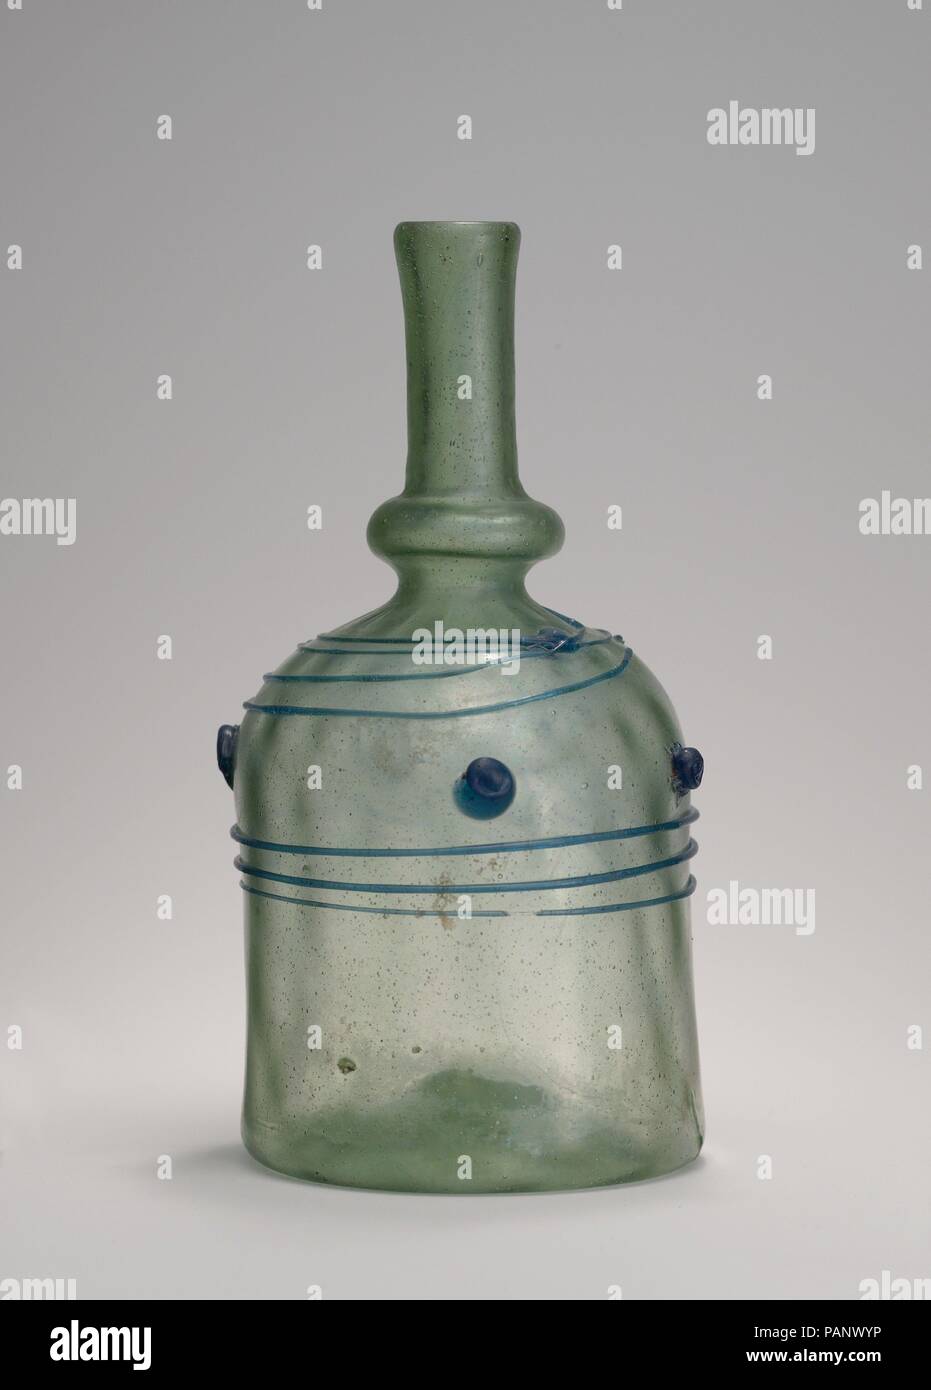 Bottle with Blue Trails. Dimensions: H. 6 11/16 in. (17 cm)  Max. Diam. 3 1/8 in. (7.9 cm). Date: 12th century.  This appealing pale green bottle was initially blown into a mold with narrow vertical ribs and then inflated so that the ribs appear in very shallow, nearly imperceptible relief. A long, thin trail of dark blue glass spirals around the object, forming an irregular pattern. Additional, shorter trails form a festooned design around the base of the neck, and four small blue blobs dot a larger band created by the spiraling trail. Bottles of this shape and decorated with blobs of glass i Stock Photo